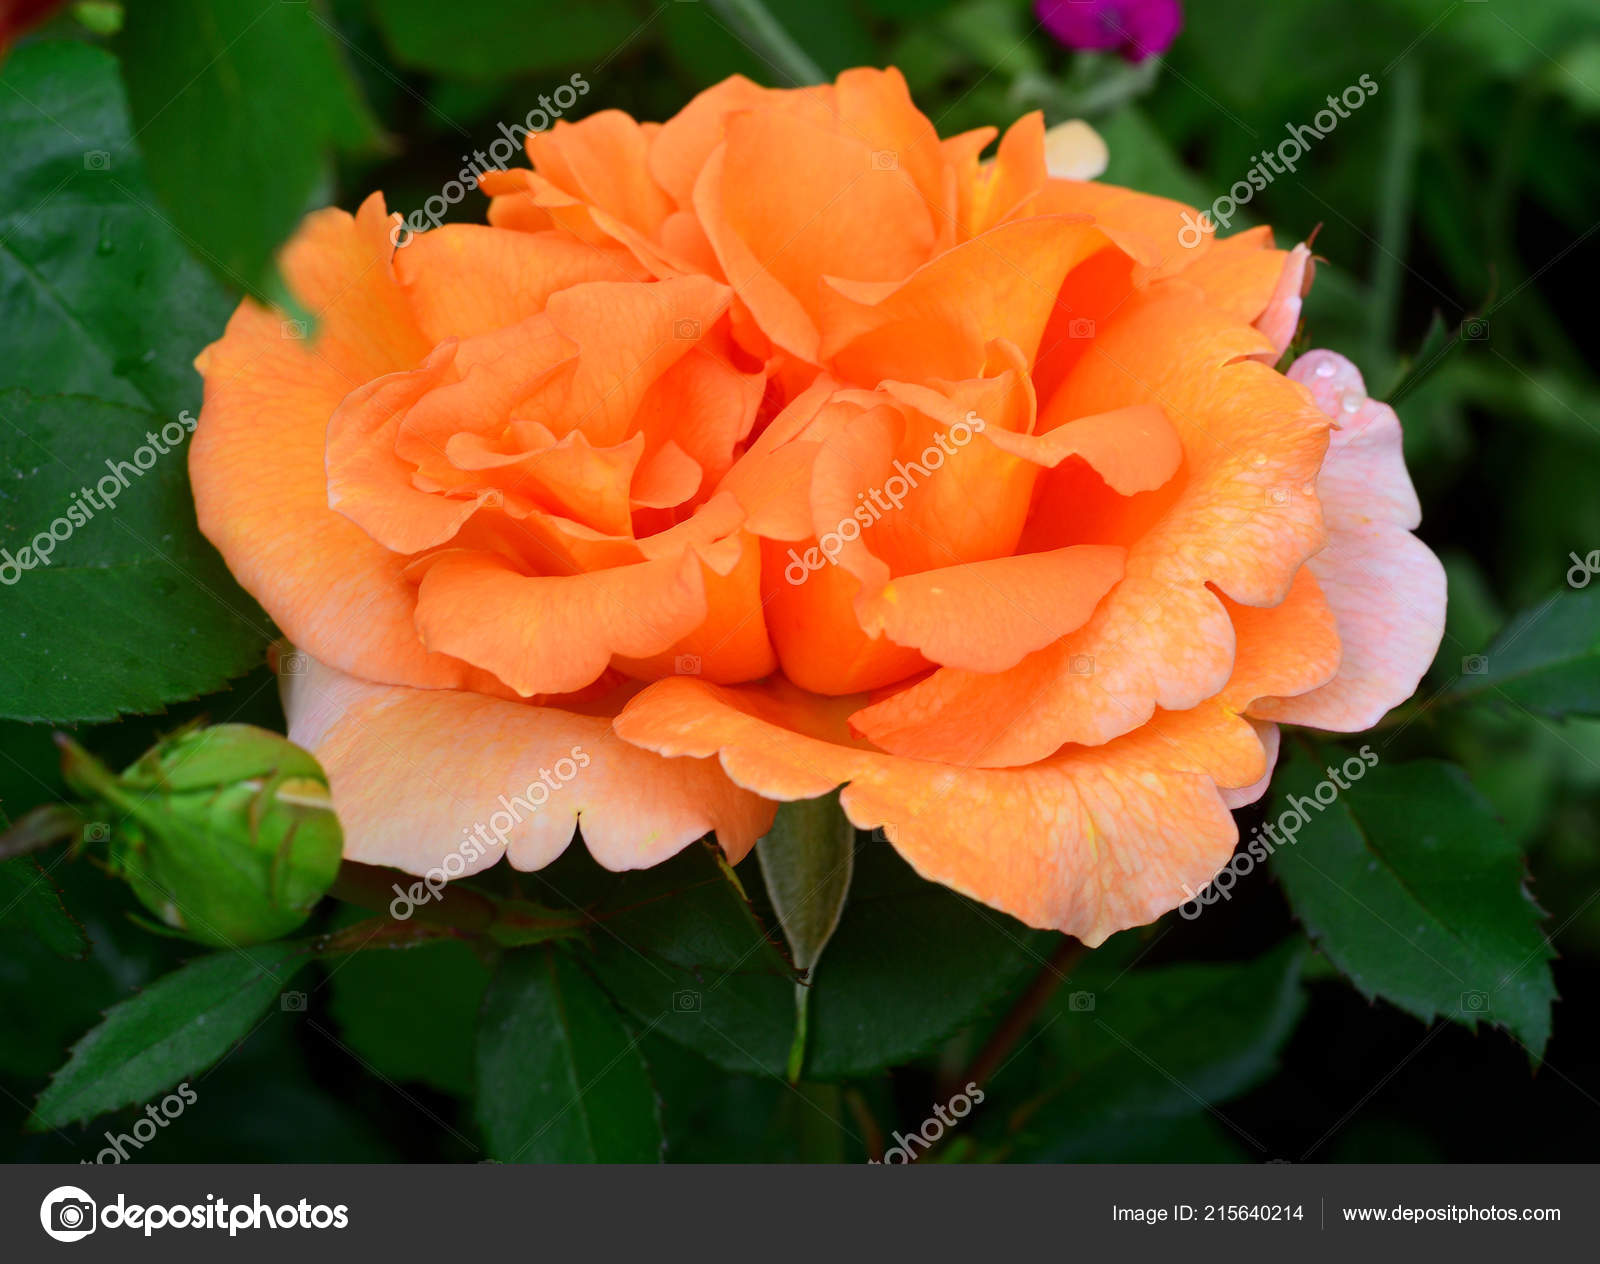 Beautiful Flowers Roses Peach Colour Bud Garden Lawn Background